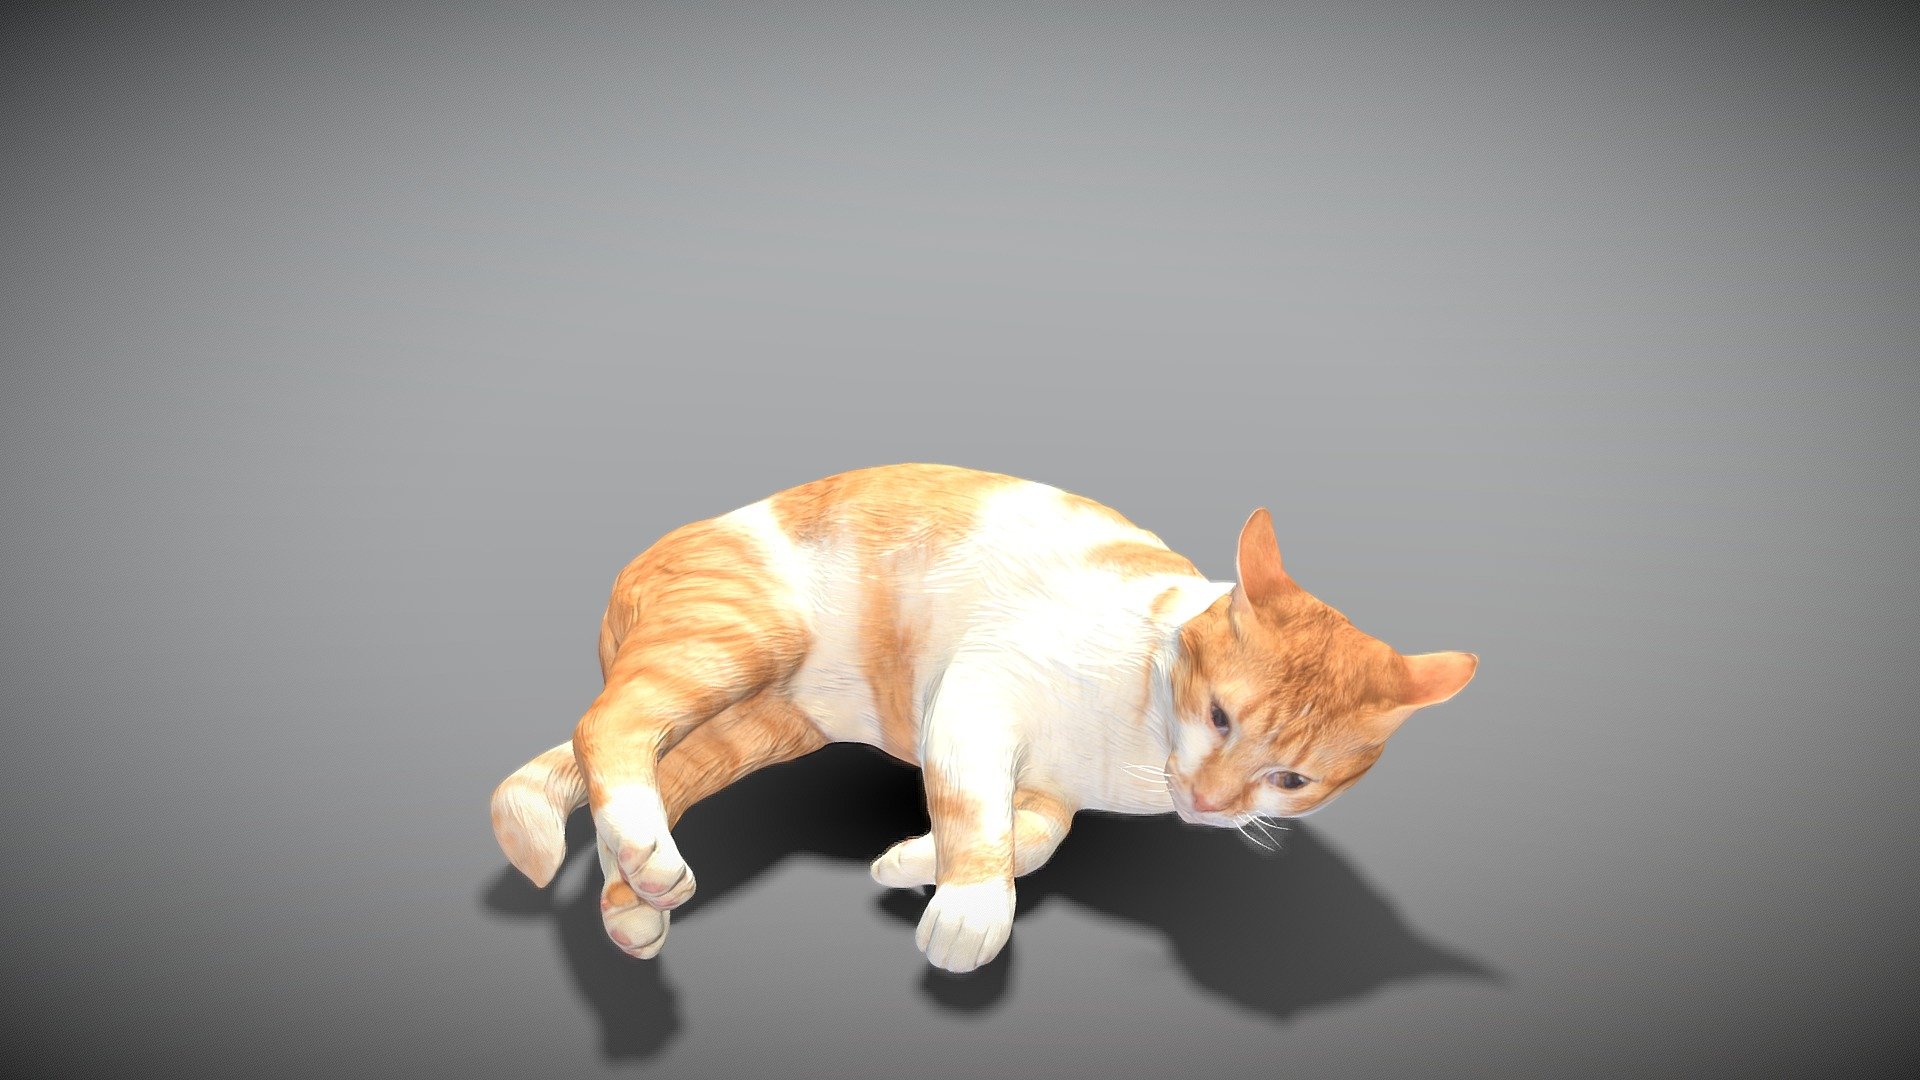 This is a true sized and highly detailed model of a young charming red cat. It will add life and coziness to any architectural visualisation of houses, playgrounds, parques, urban landscapes, etc. This model is suitable for game engine integration, VR/AR content, etc.

Technical specifications:




digital double 3d scan model

150k &amp; 30k triangles | double triangulated

high-poly model (.ztl tool with 5 subdivisions) clean and retopologized automatically via ZRemesher

sufficiently clean

PBR textures 8K resolution: Diffuse, Normal, Specular maps

non-overlapping UV map

no extra plugins are required for this model

Download package includes a Cinema 4D project file with Redshift shader, OBJ, FBX, STL files, which are applicable for 3ds Max, Maya, Unreal Engine, Unity, Blender, etc. All the textures you will find in the “Tex” folder, included into the main archive.

3D EVERYTHING

Stand with Ukraine! - Lying cat 43 - Buy Royalty Free 3D model by deep3dstudio 3d model